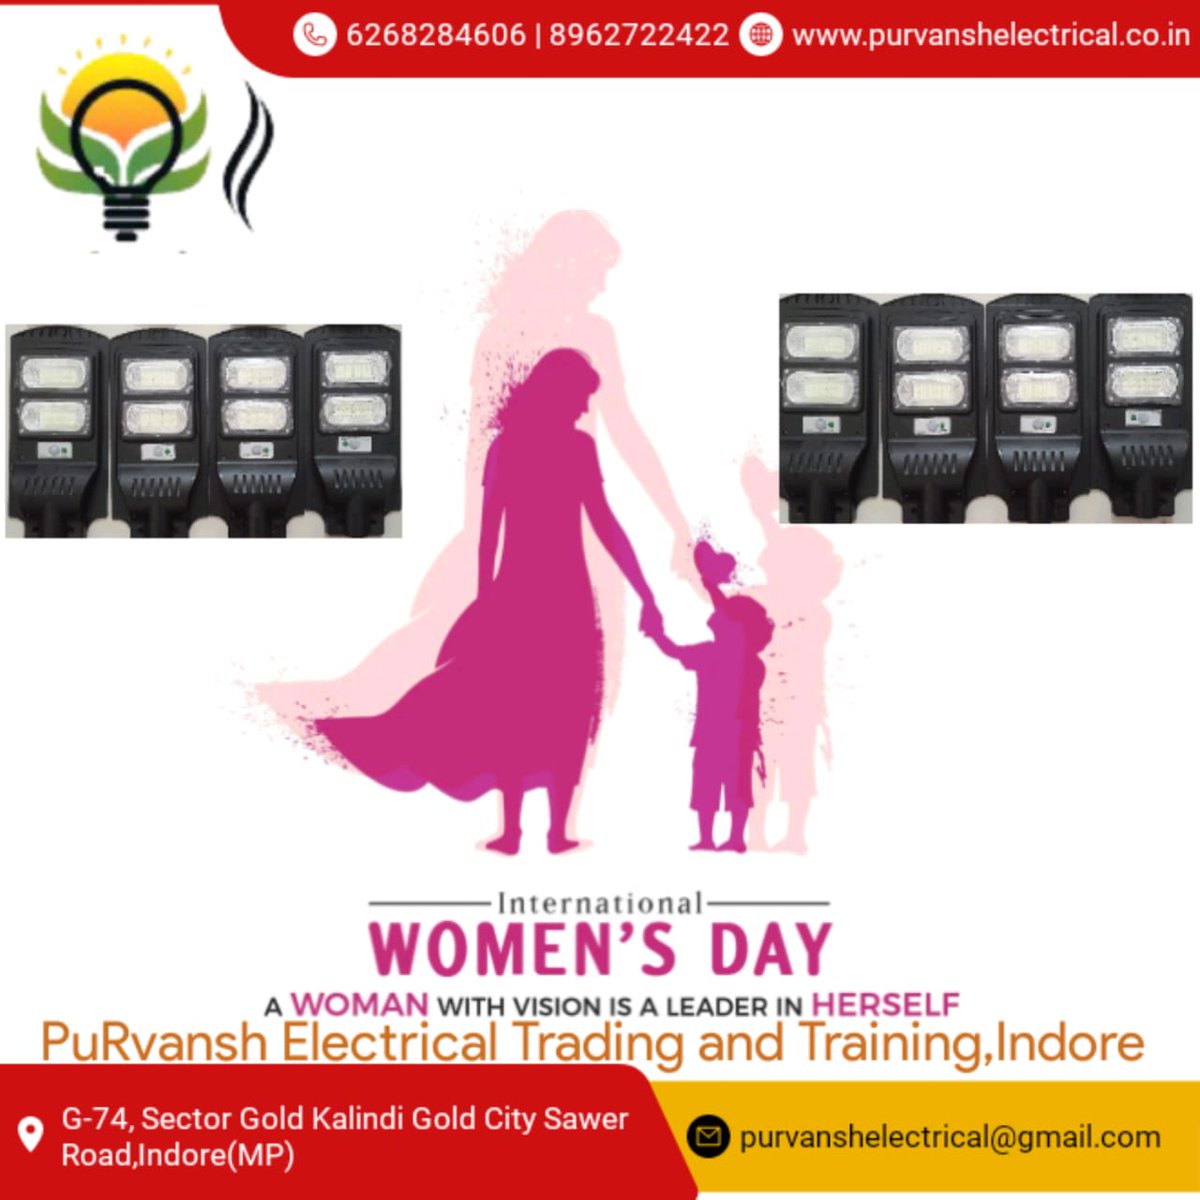 Wish you Very Happy Women's Day. 'It is global celebrating the social, economic, cultural and political achievements of women #womenempowerment #humanresource #solarstreetlight #womenchangemakers